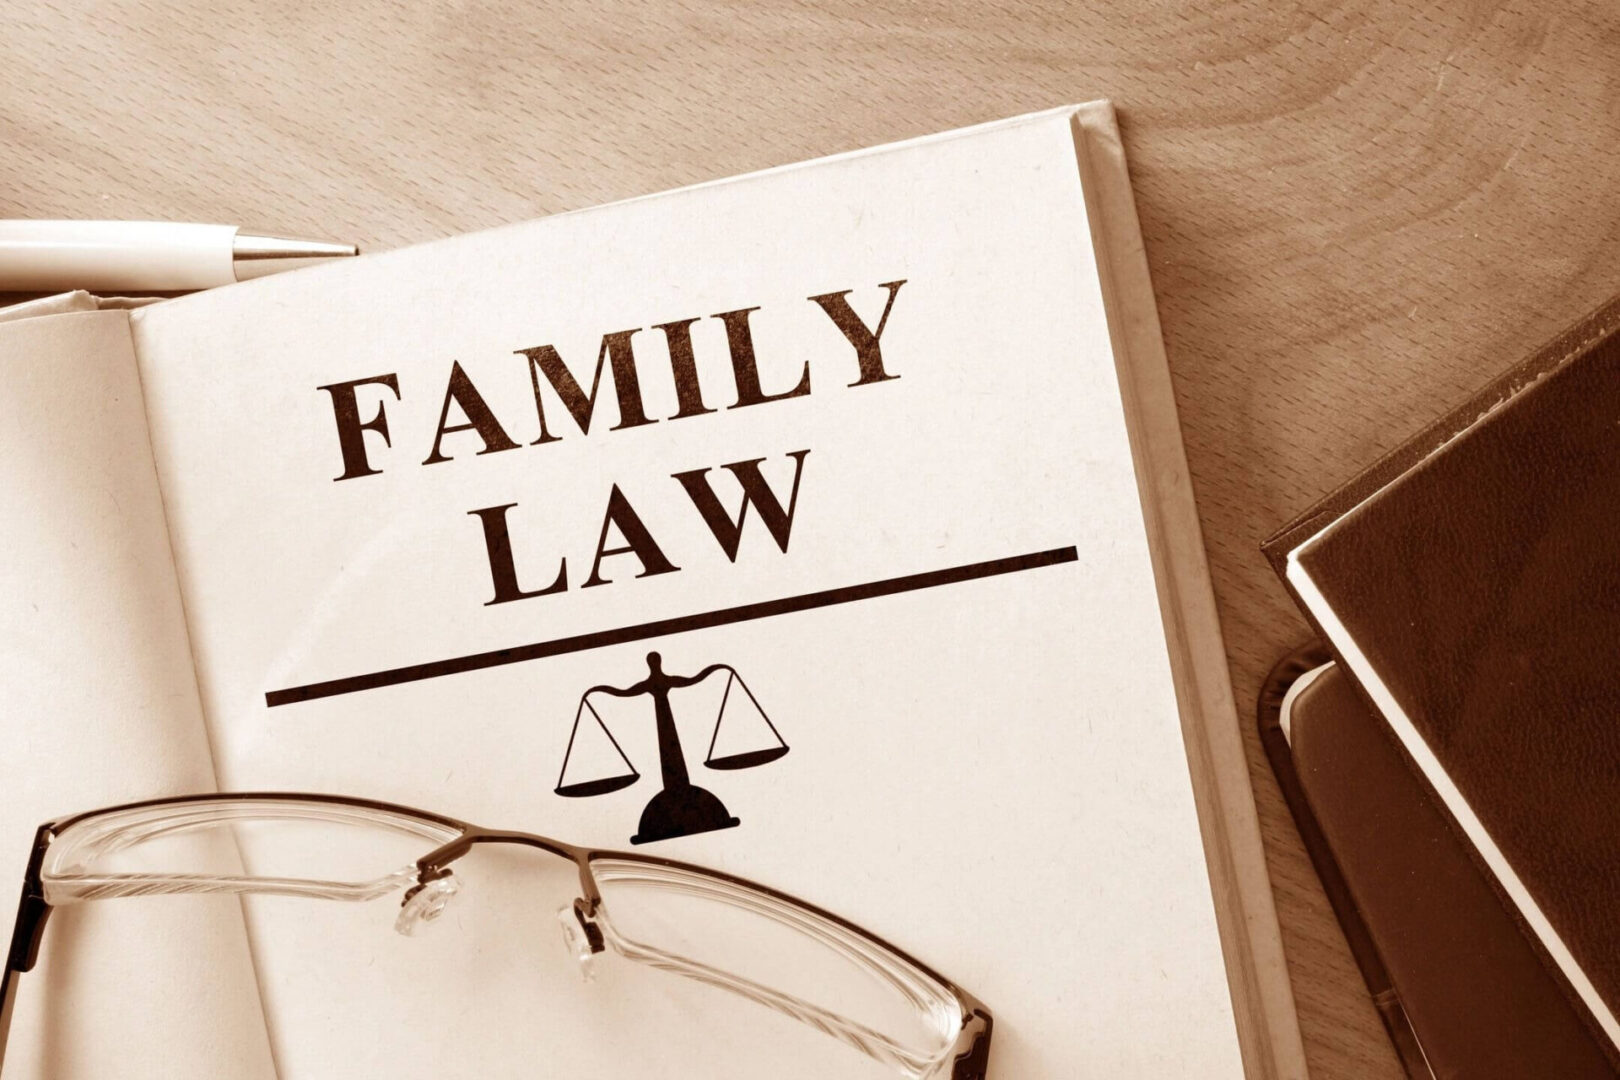 A family law book with glasses on top of it.